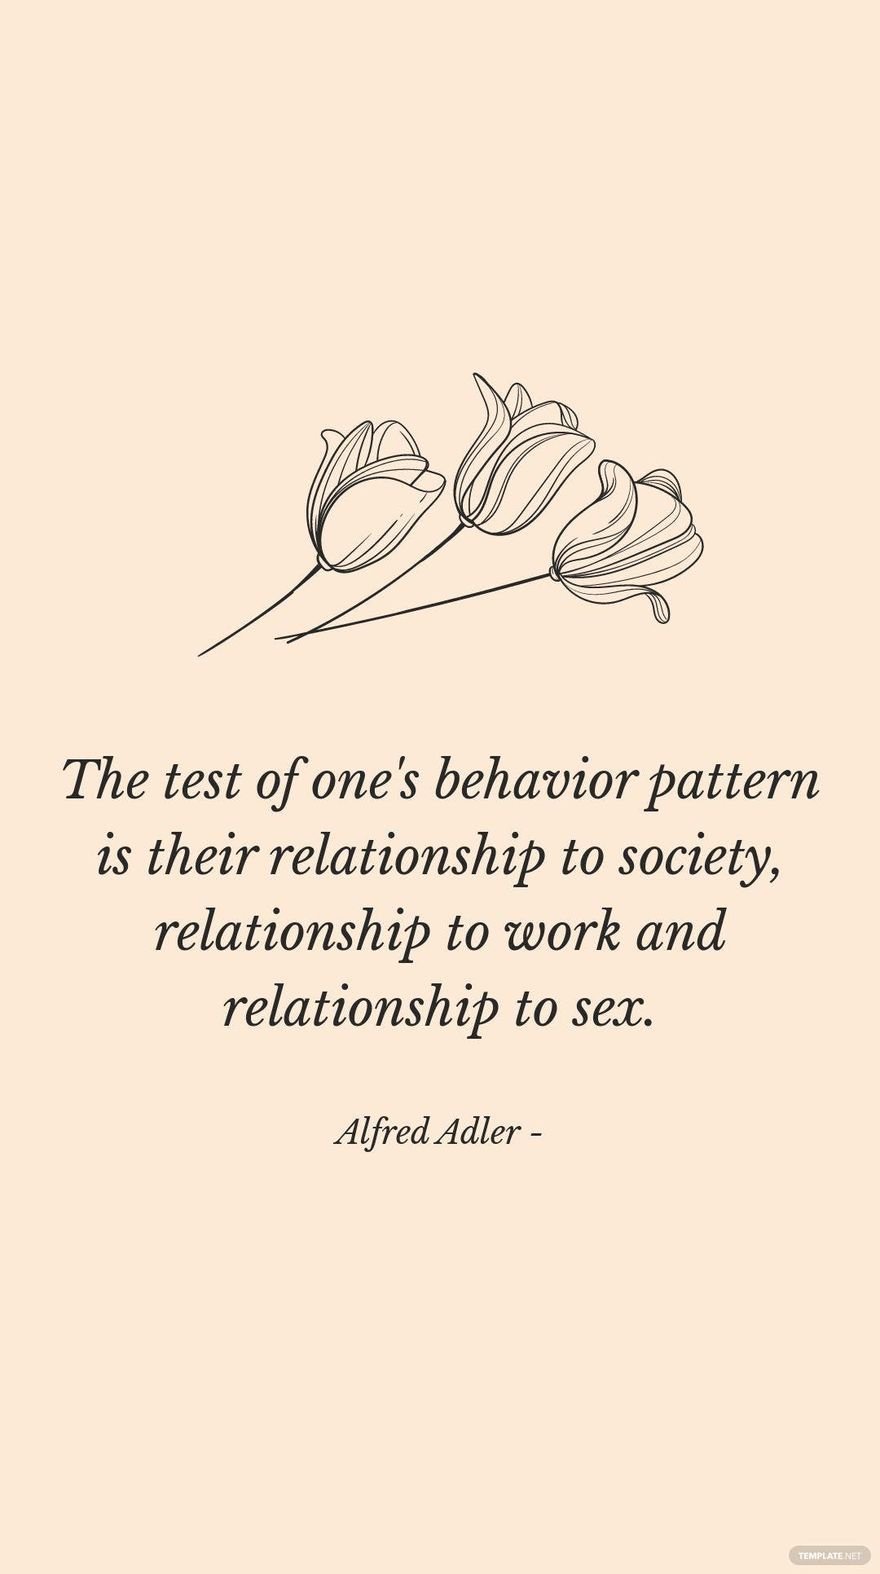 Alfred Adler - The test of one's behavior pattern is their relationship to society, relationship to work and relationship to sex.